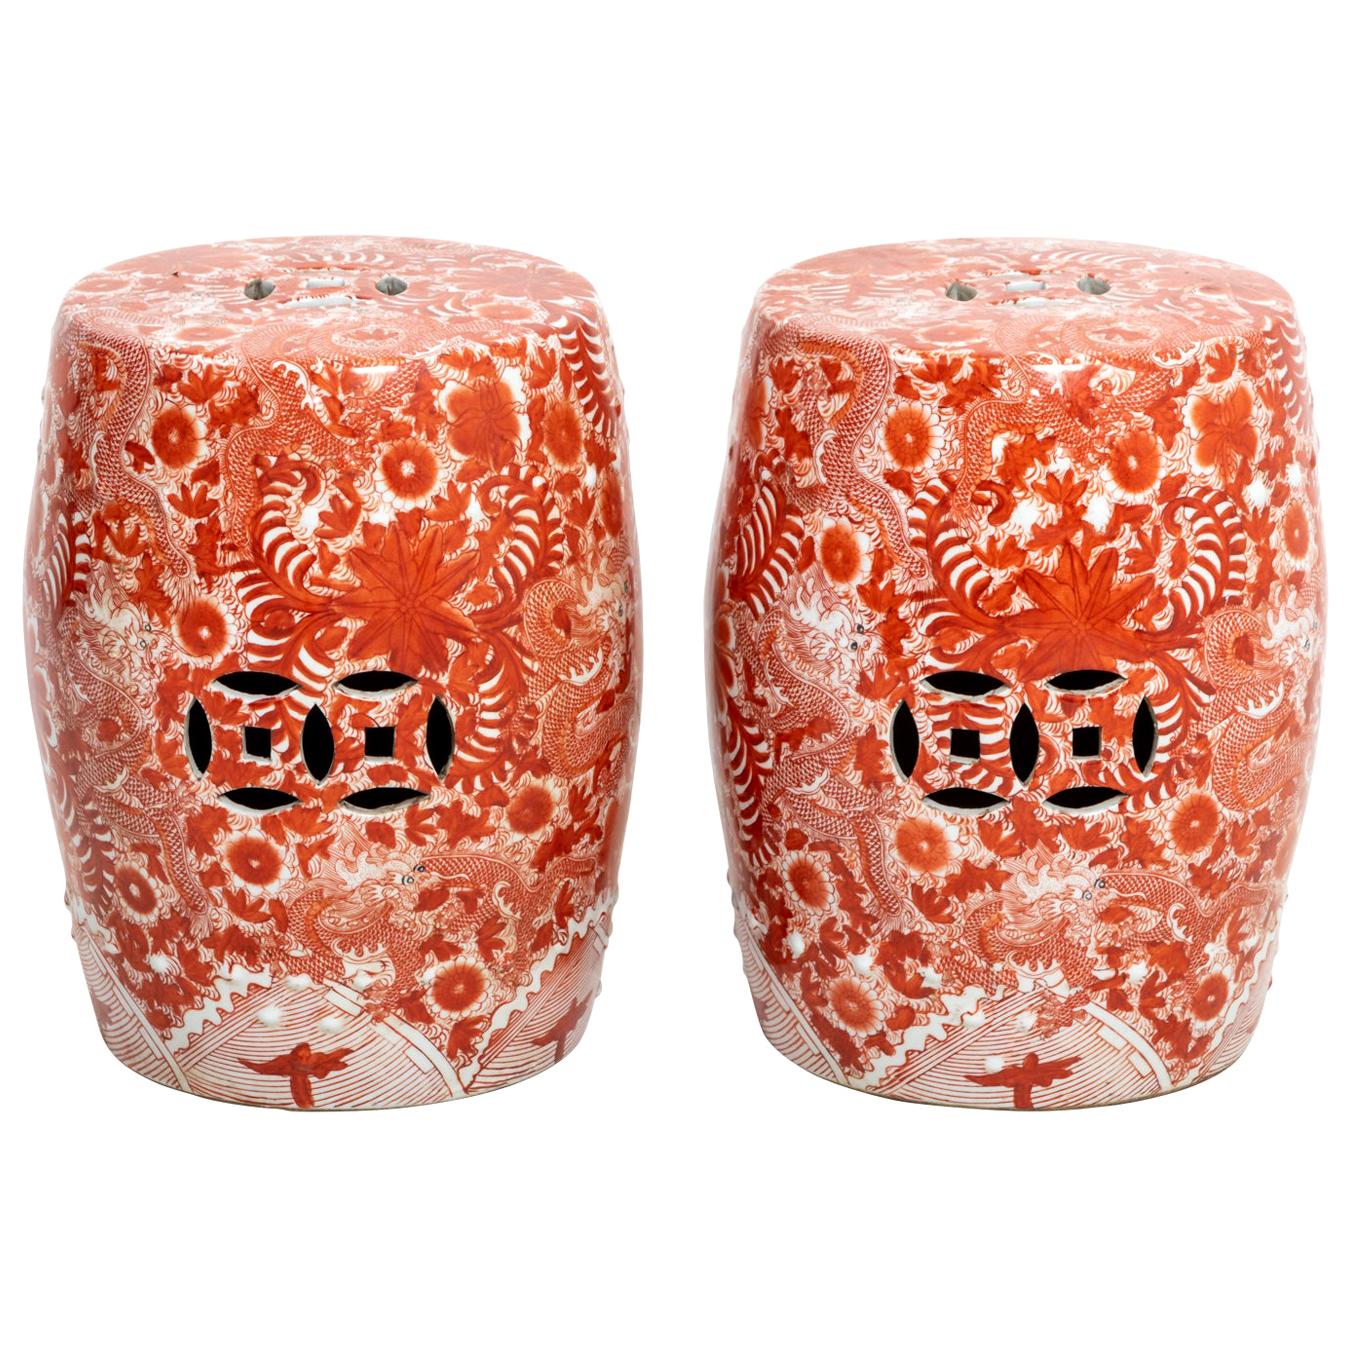 Pair of Vintage Chinese Red Floral Ceramic Garden Stools